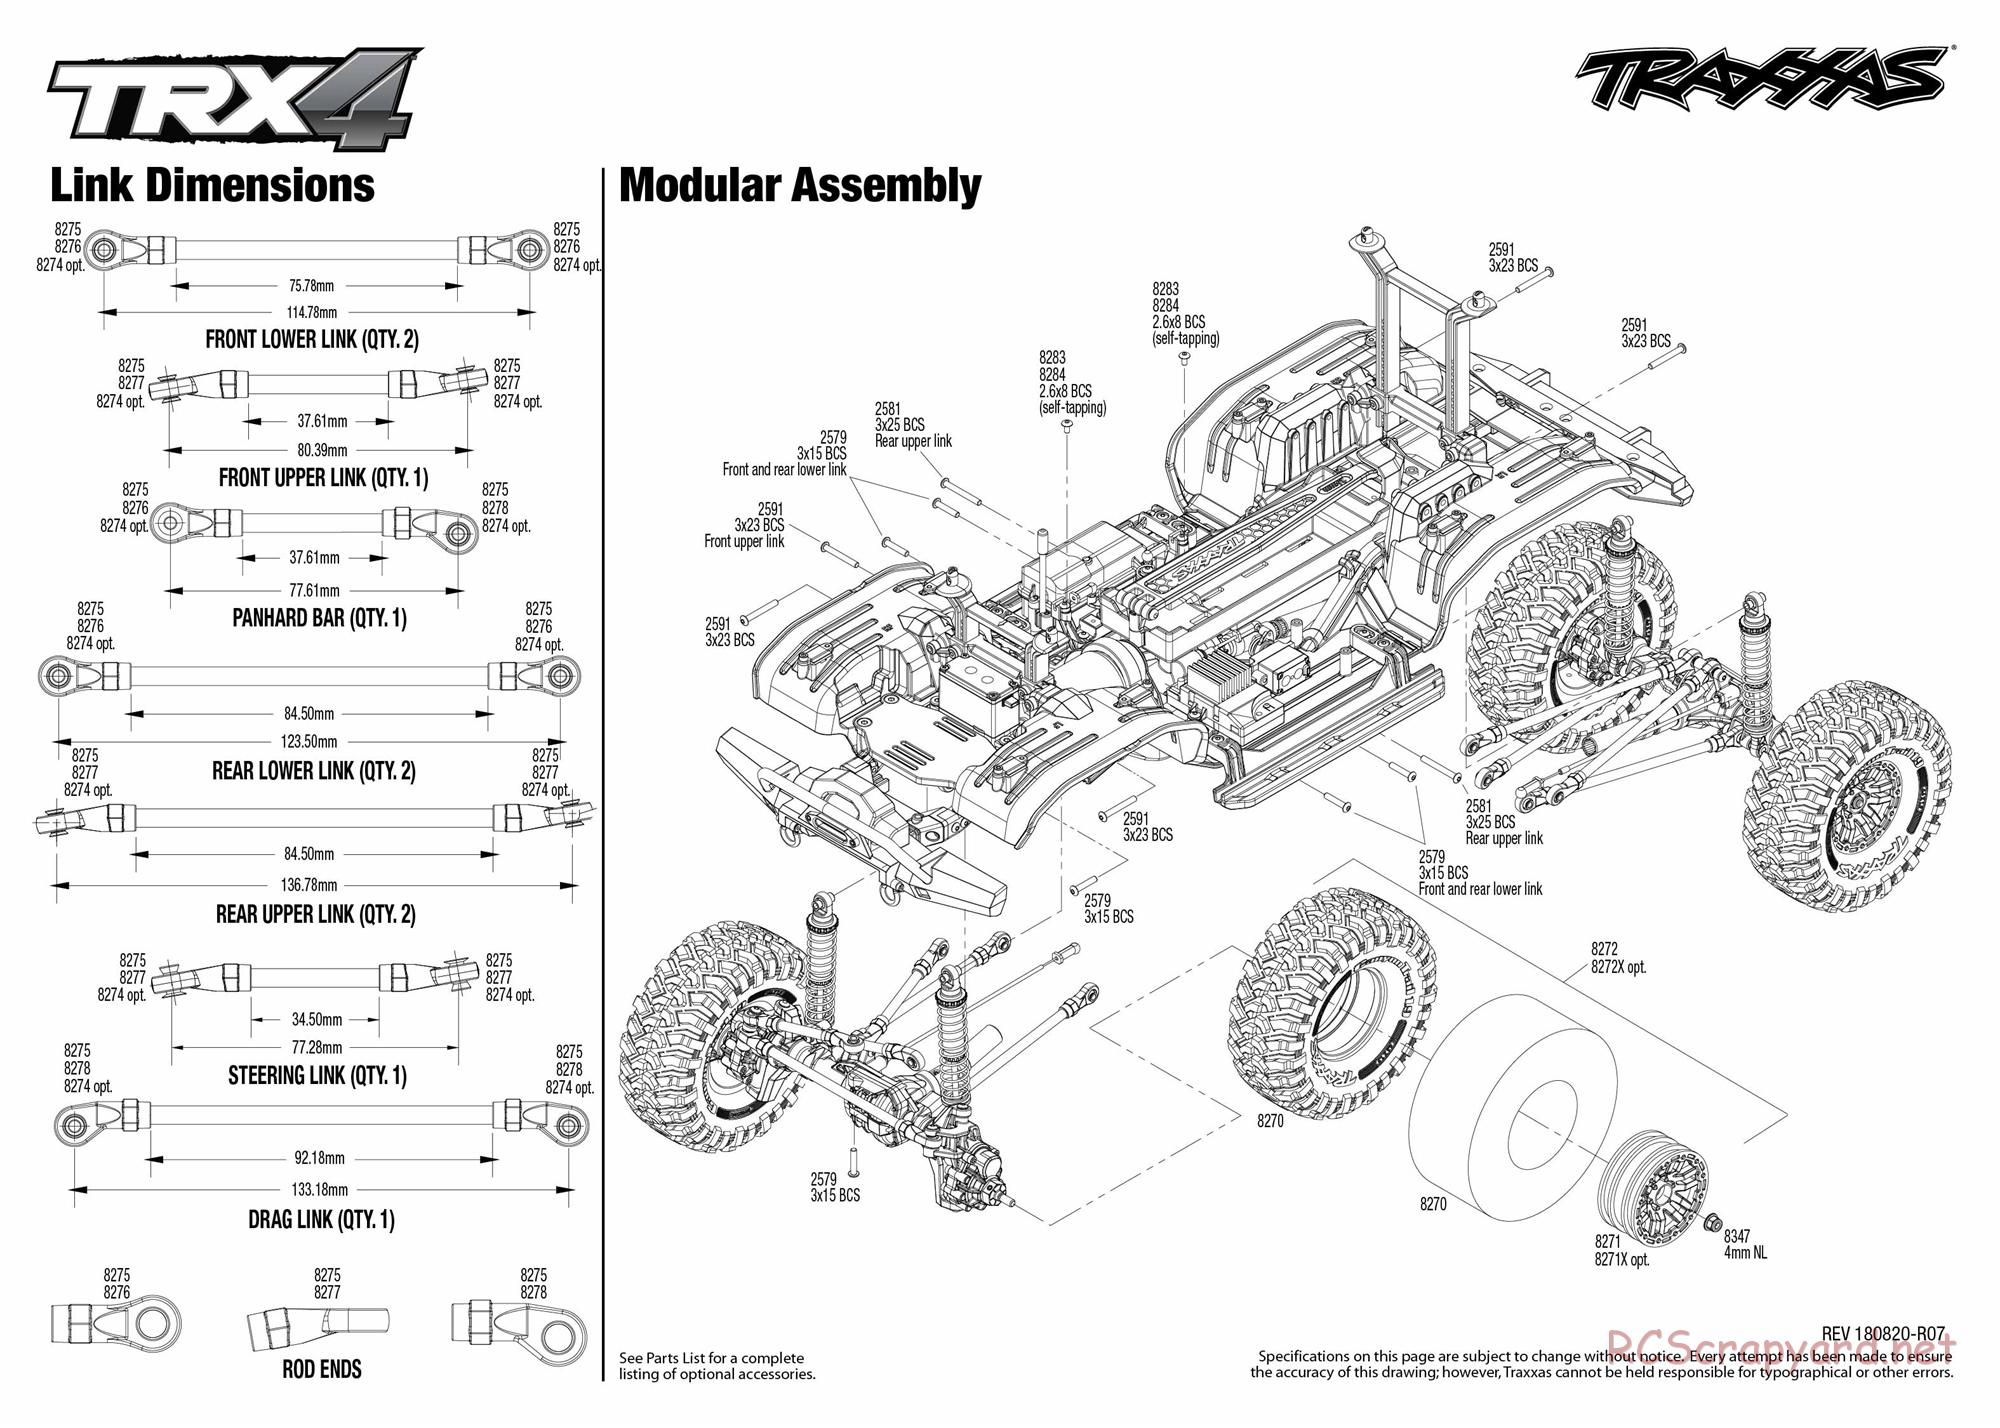 Traxxas - TRX-4 Chassis (2018) - Exploded Views - Page 3